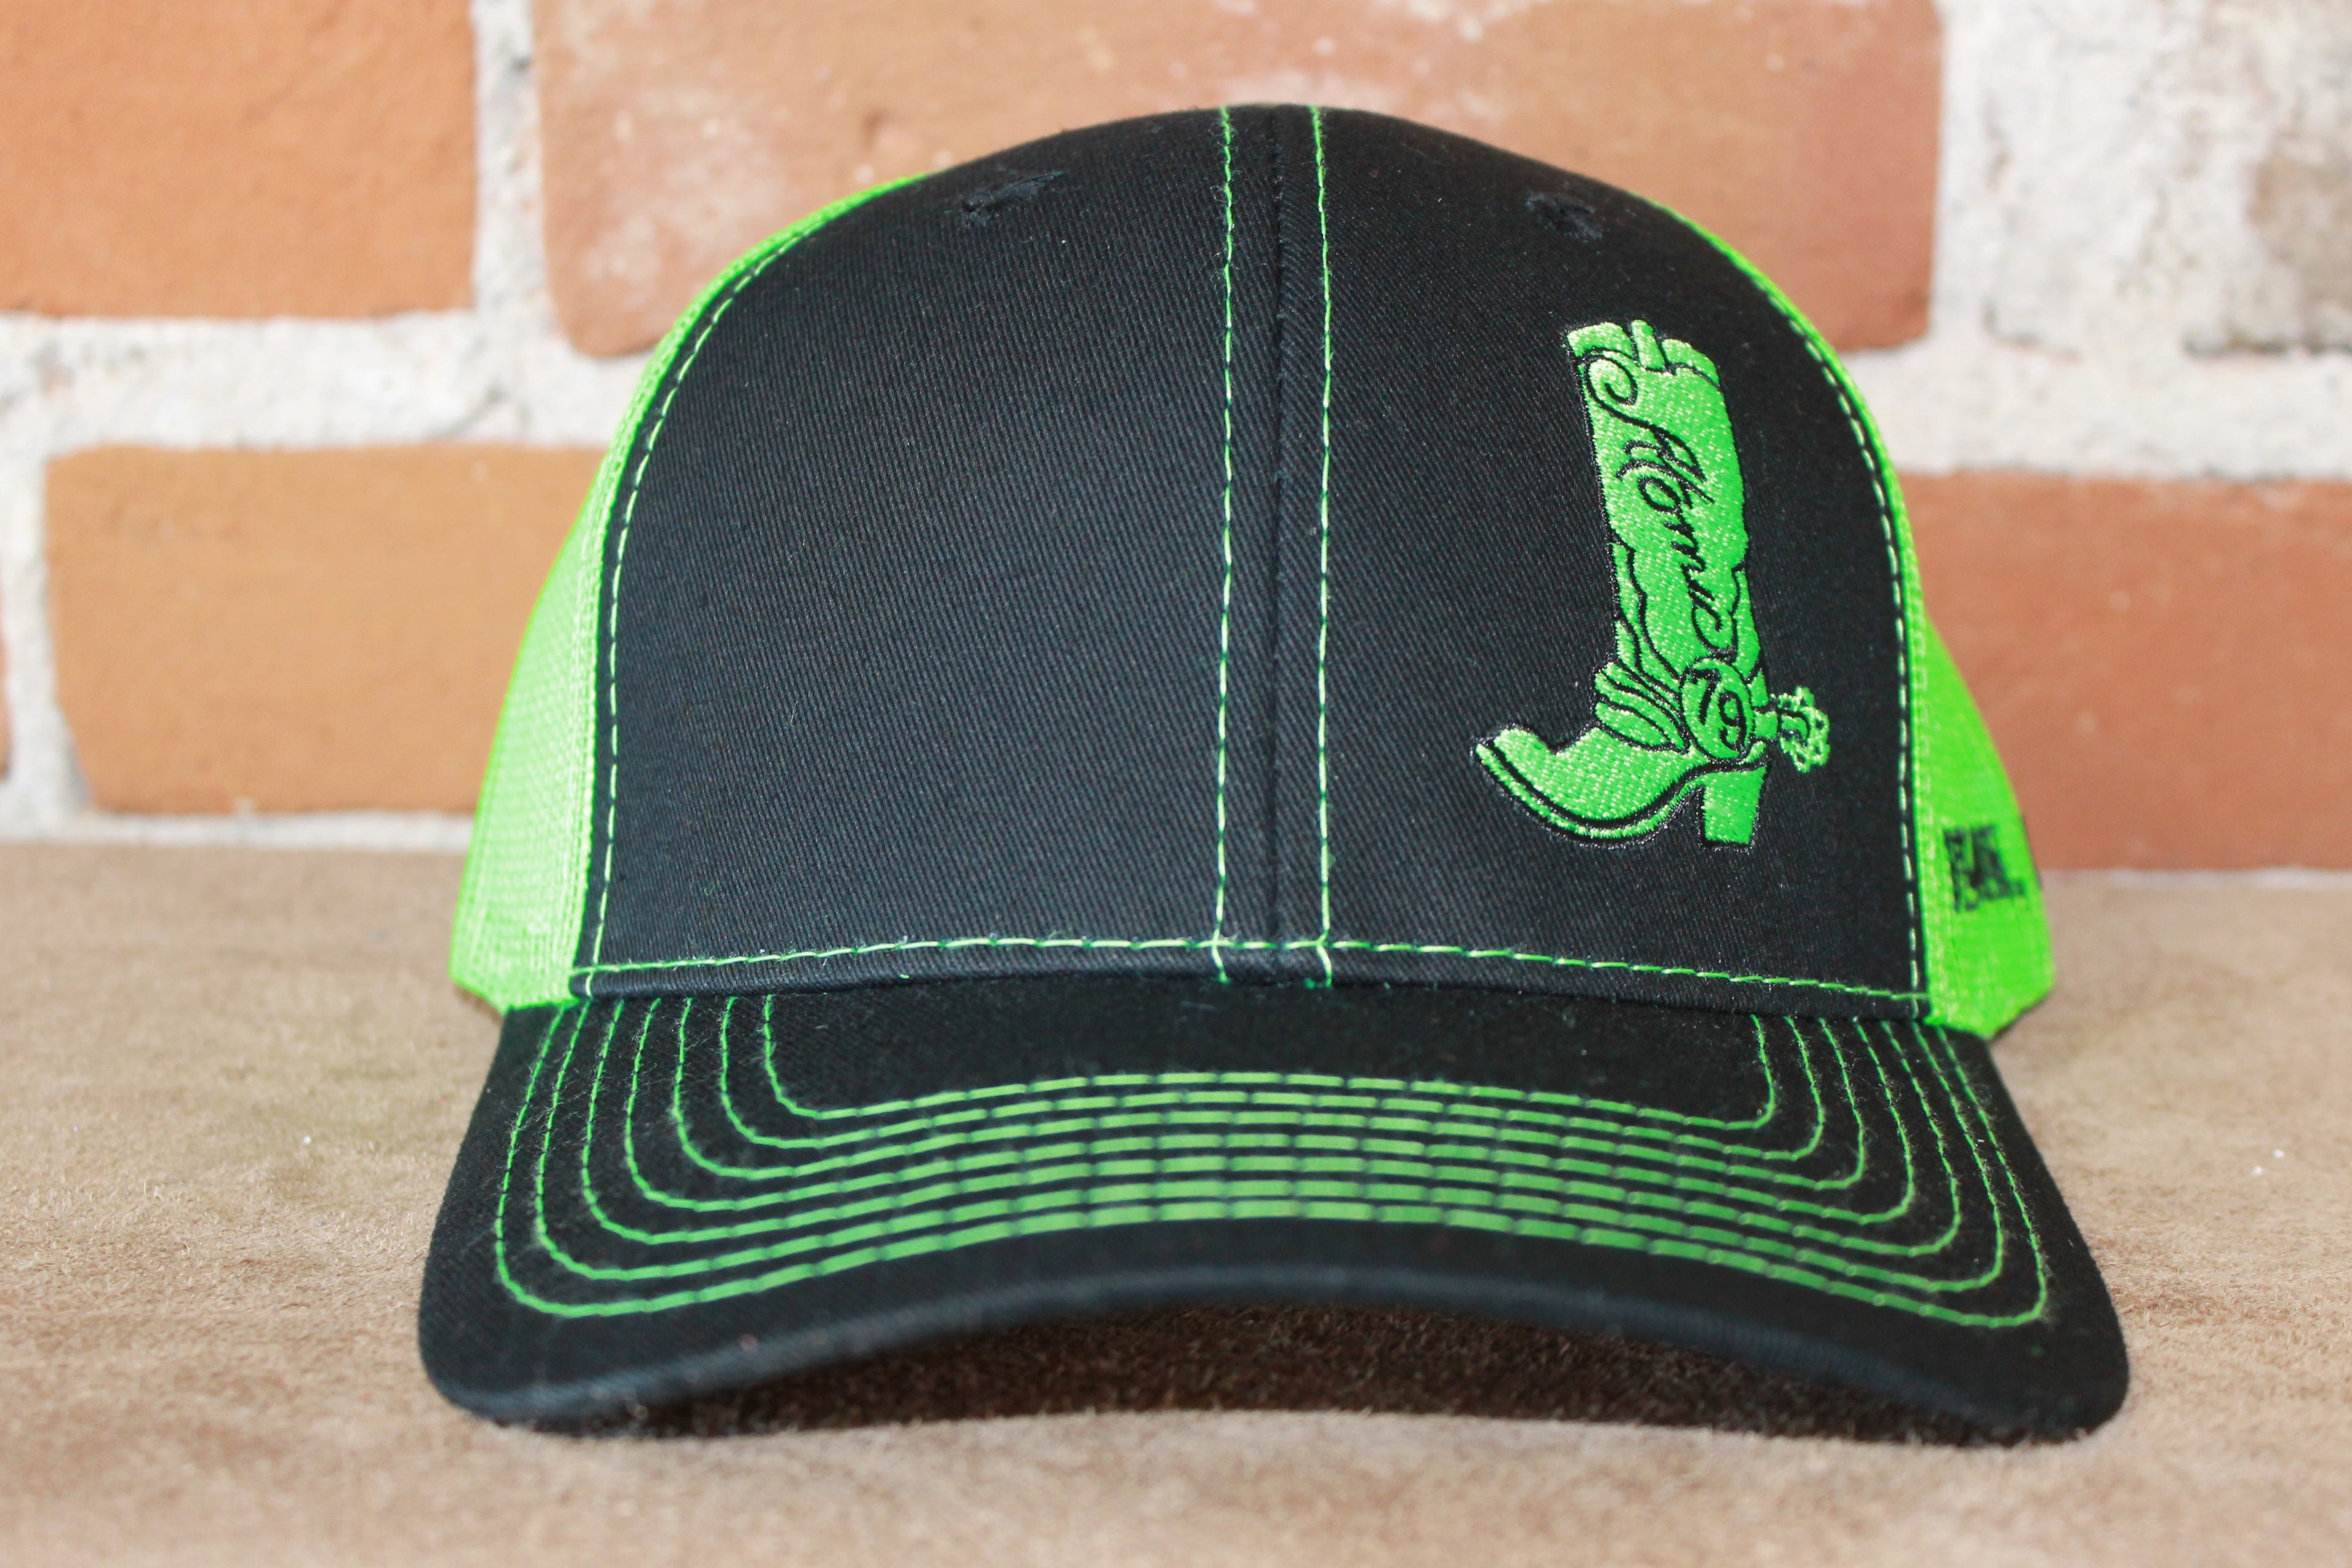 Atomic 79 Boot Black Shoot/Neon Green Mesh Cap Standard Size front view of hat